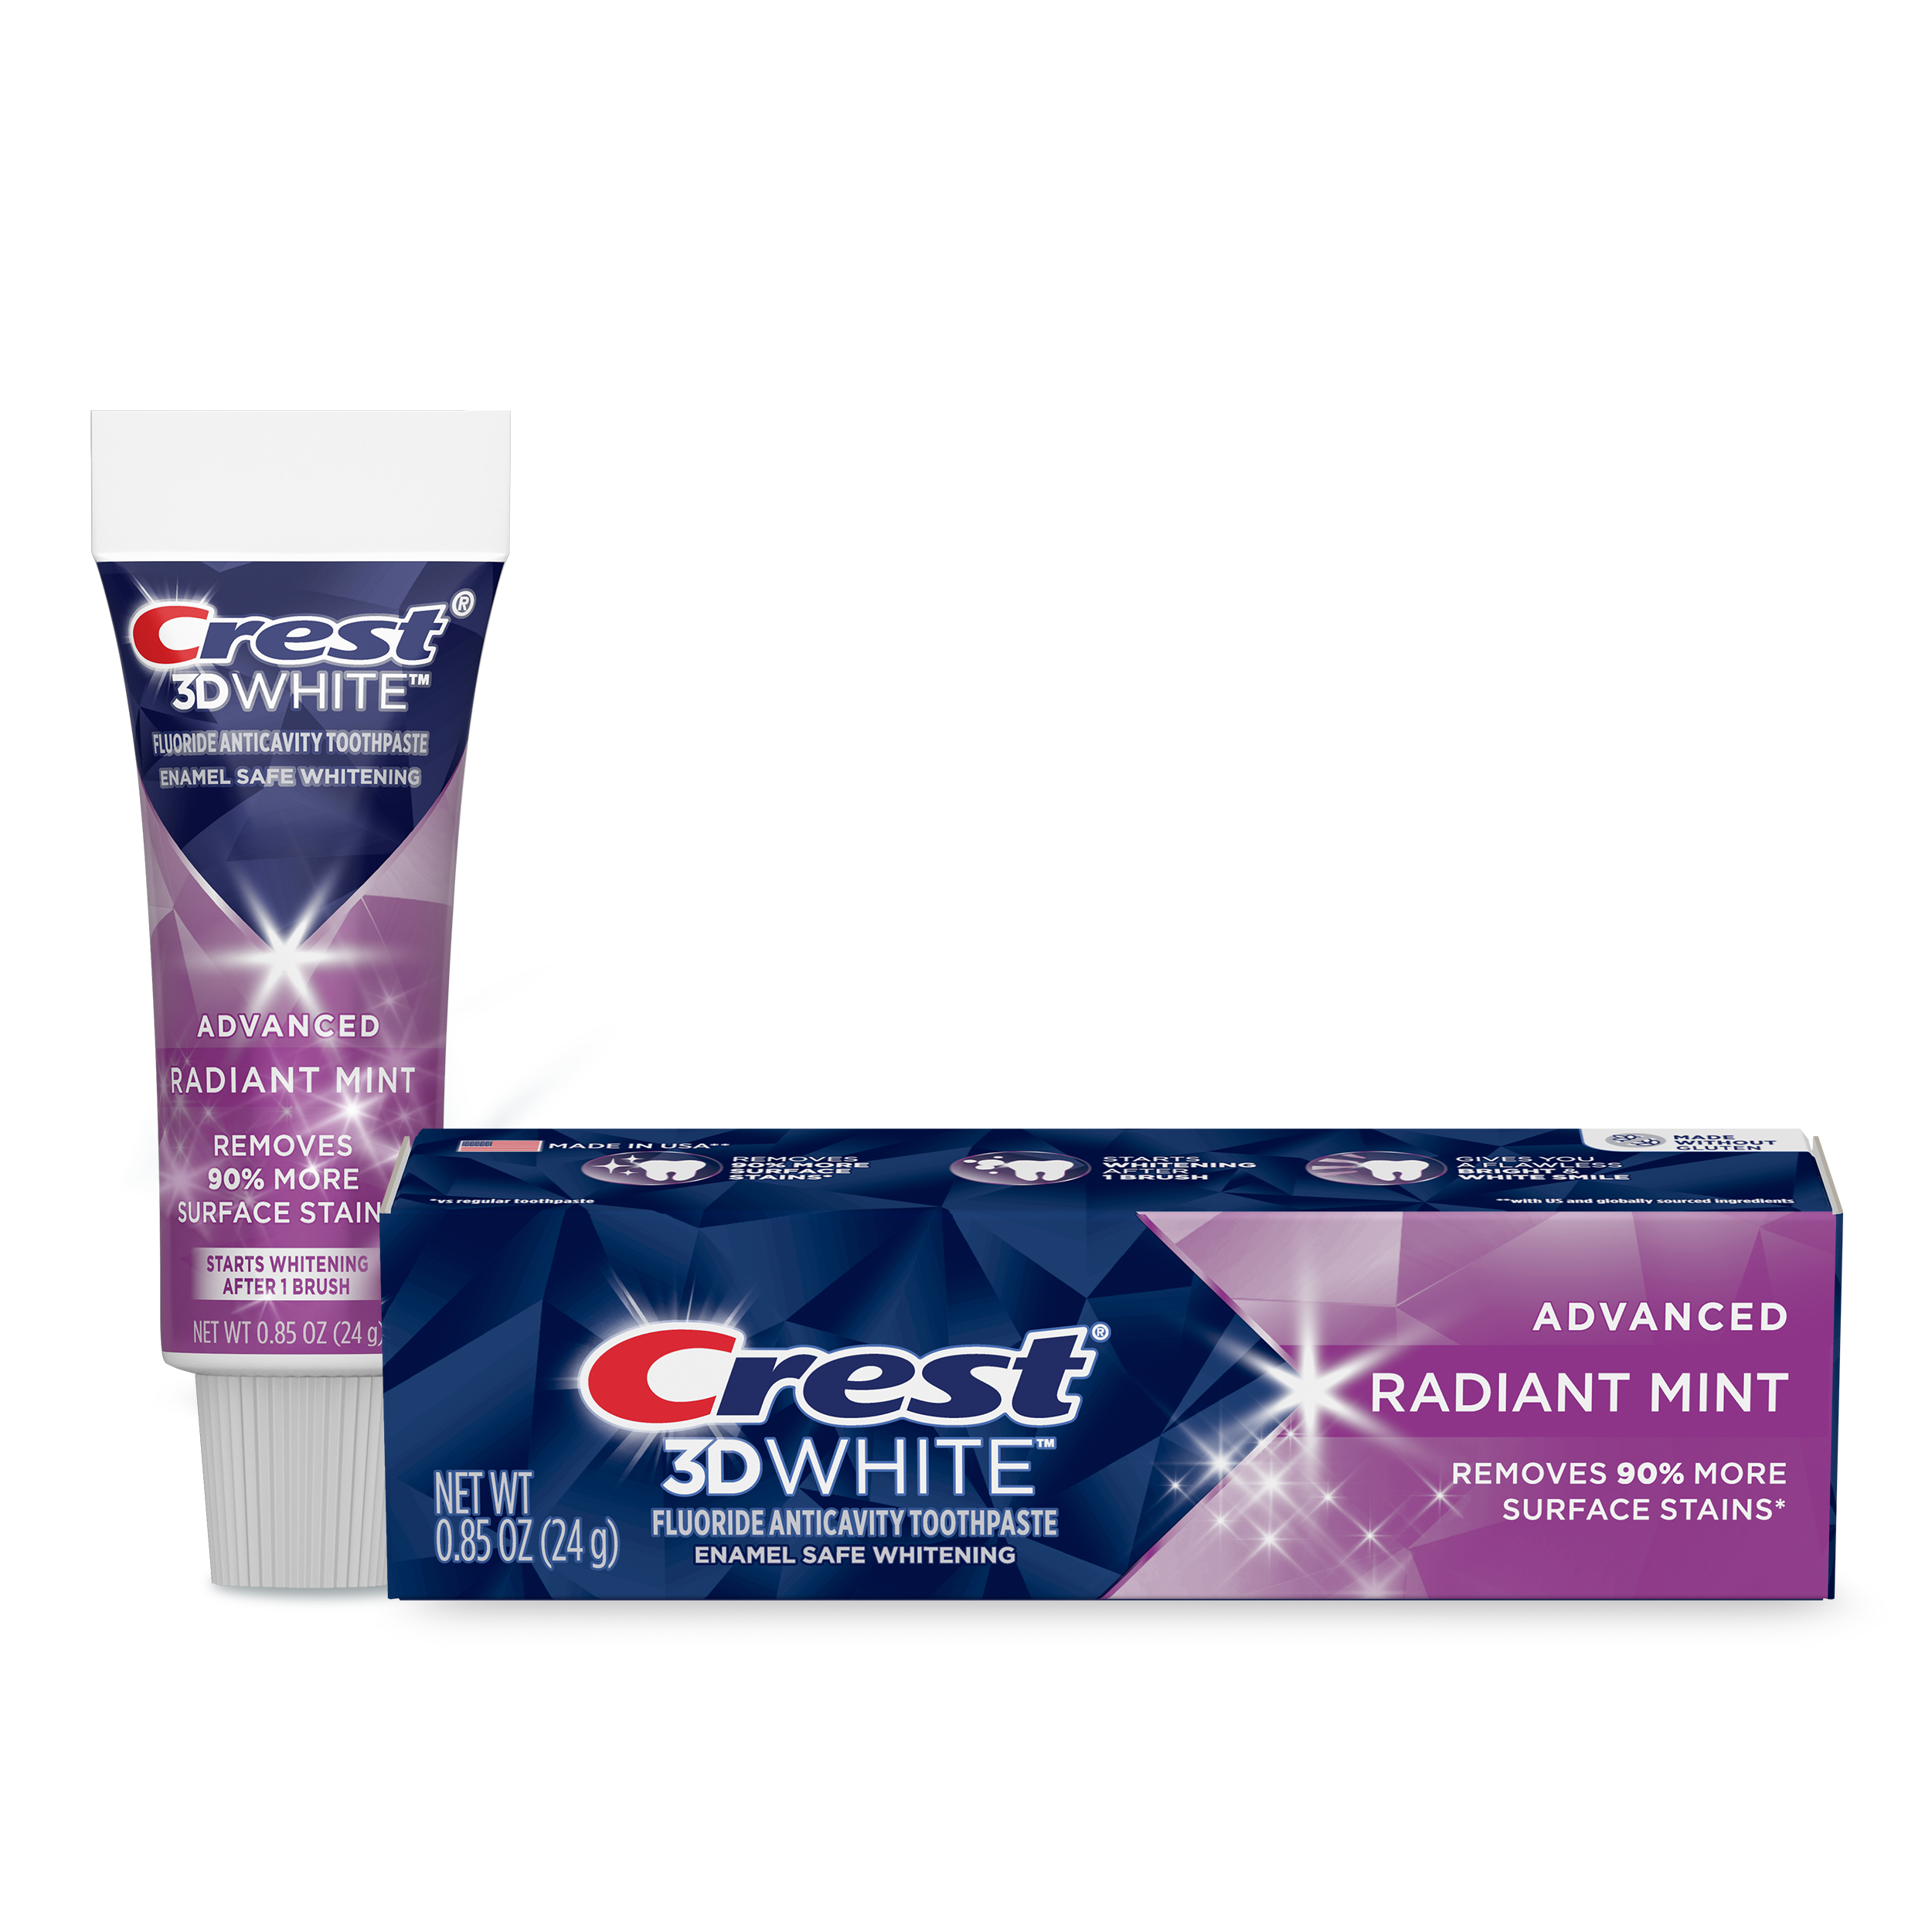 Crest 3D White Advanced Radiant Mint, Teeth Whitening Toothpaste, .85 oz - image 1 of 12